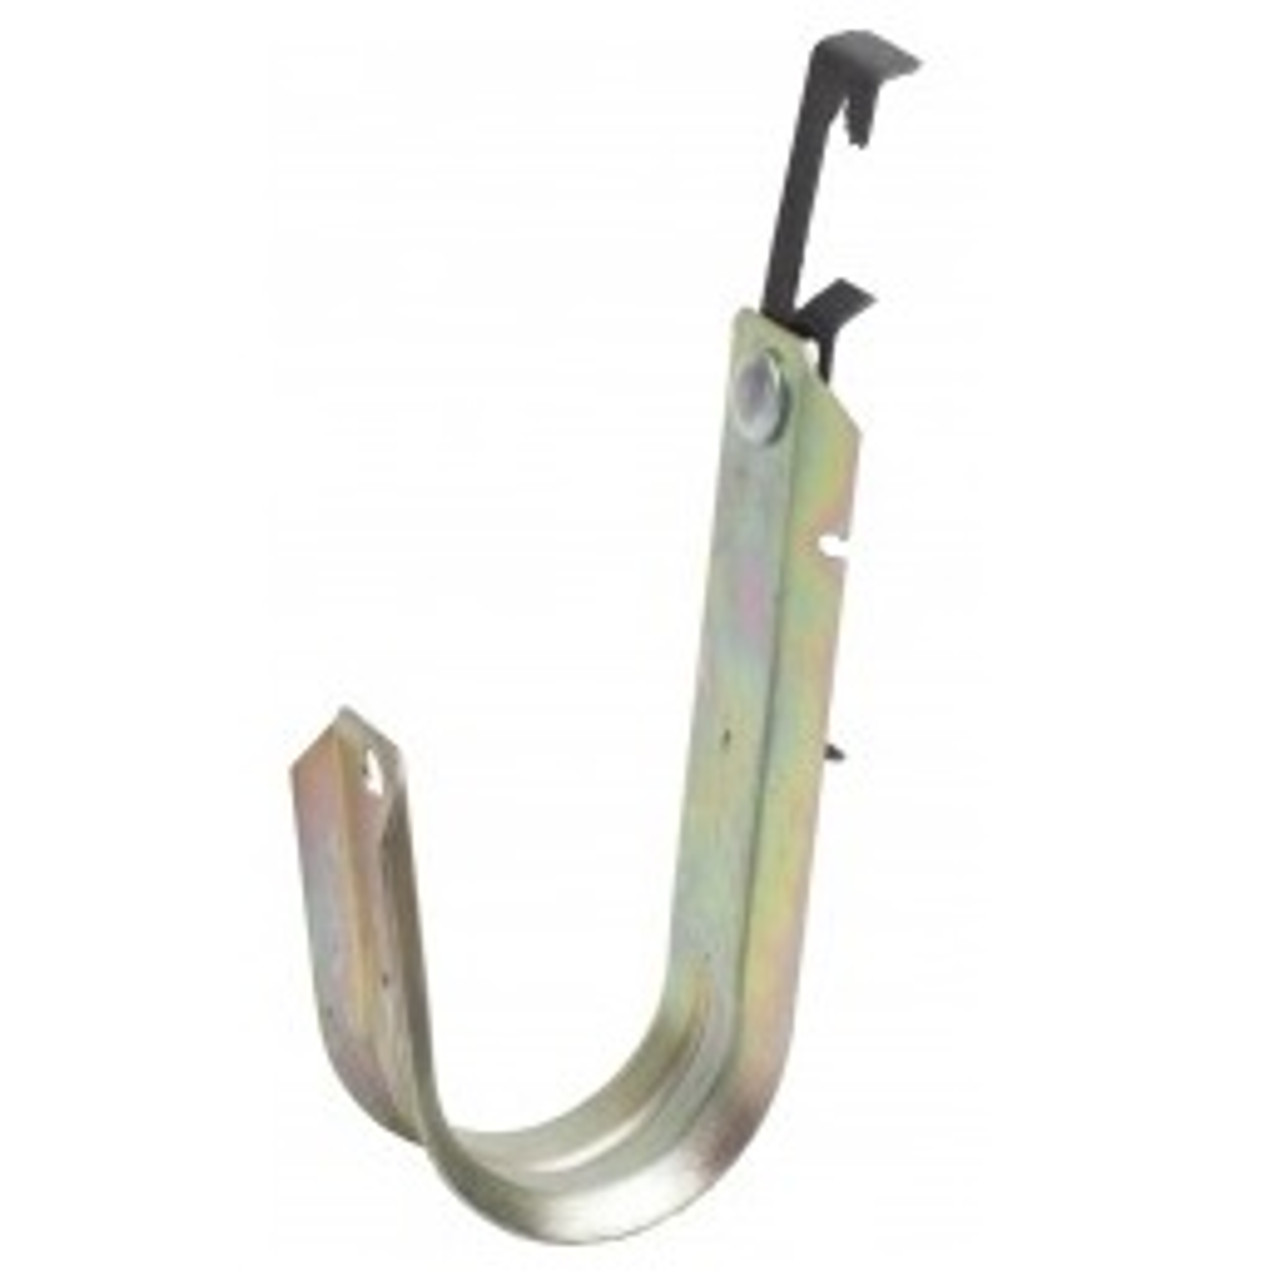 J Hook 4" Batwing type, Size 64, Sell By Each.